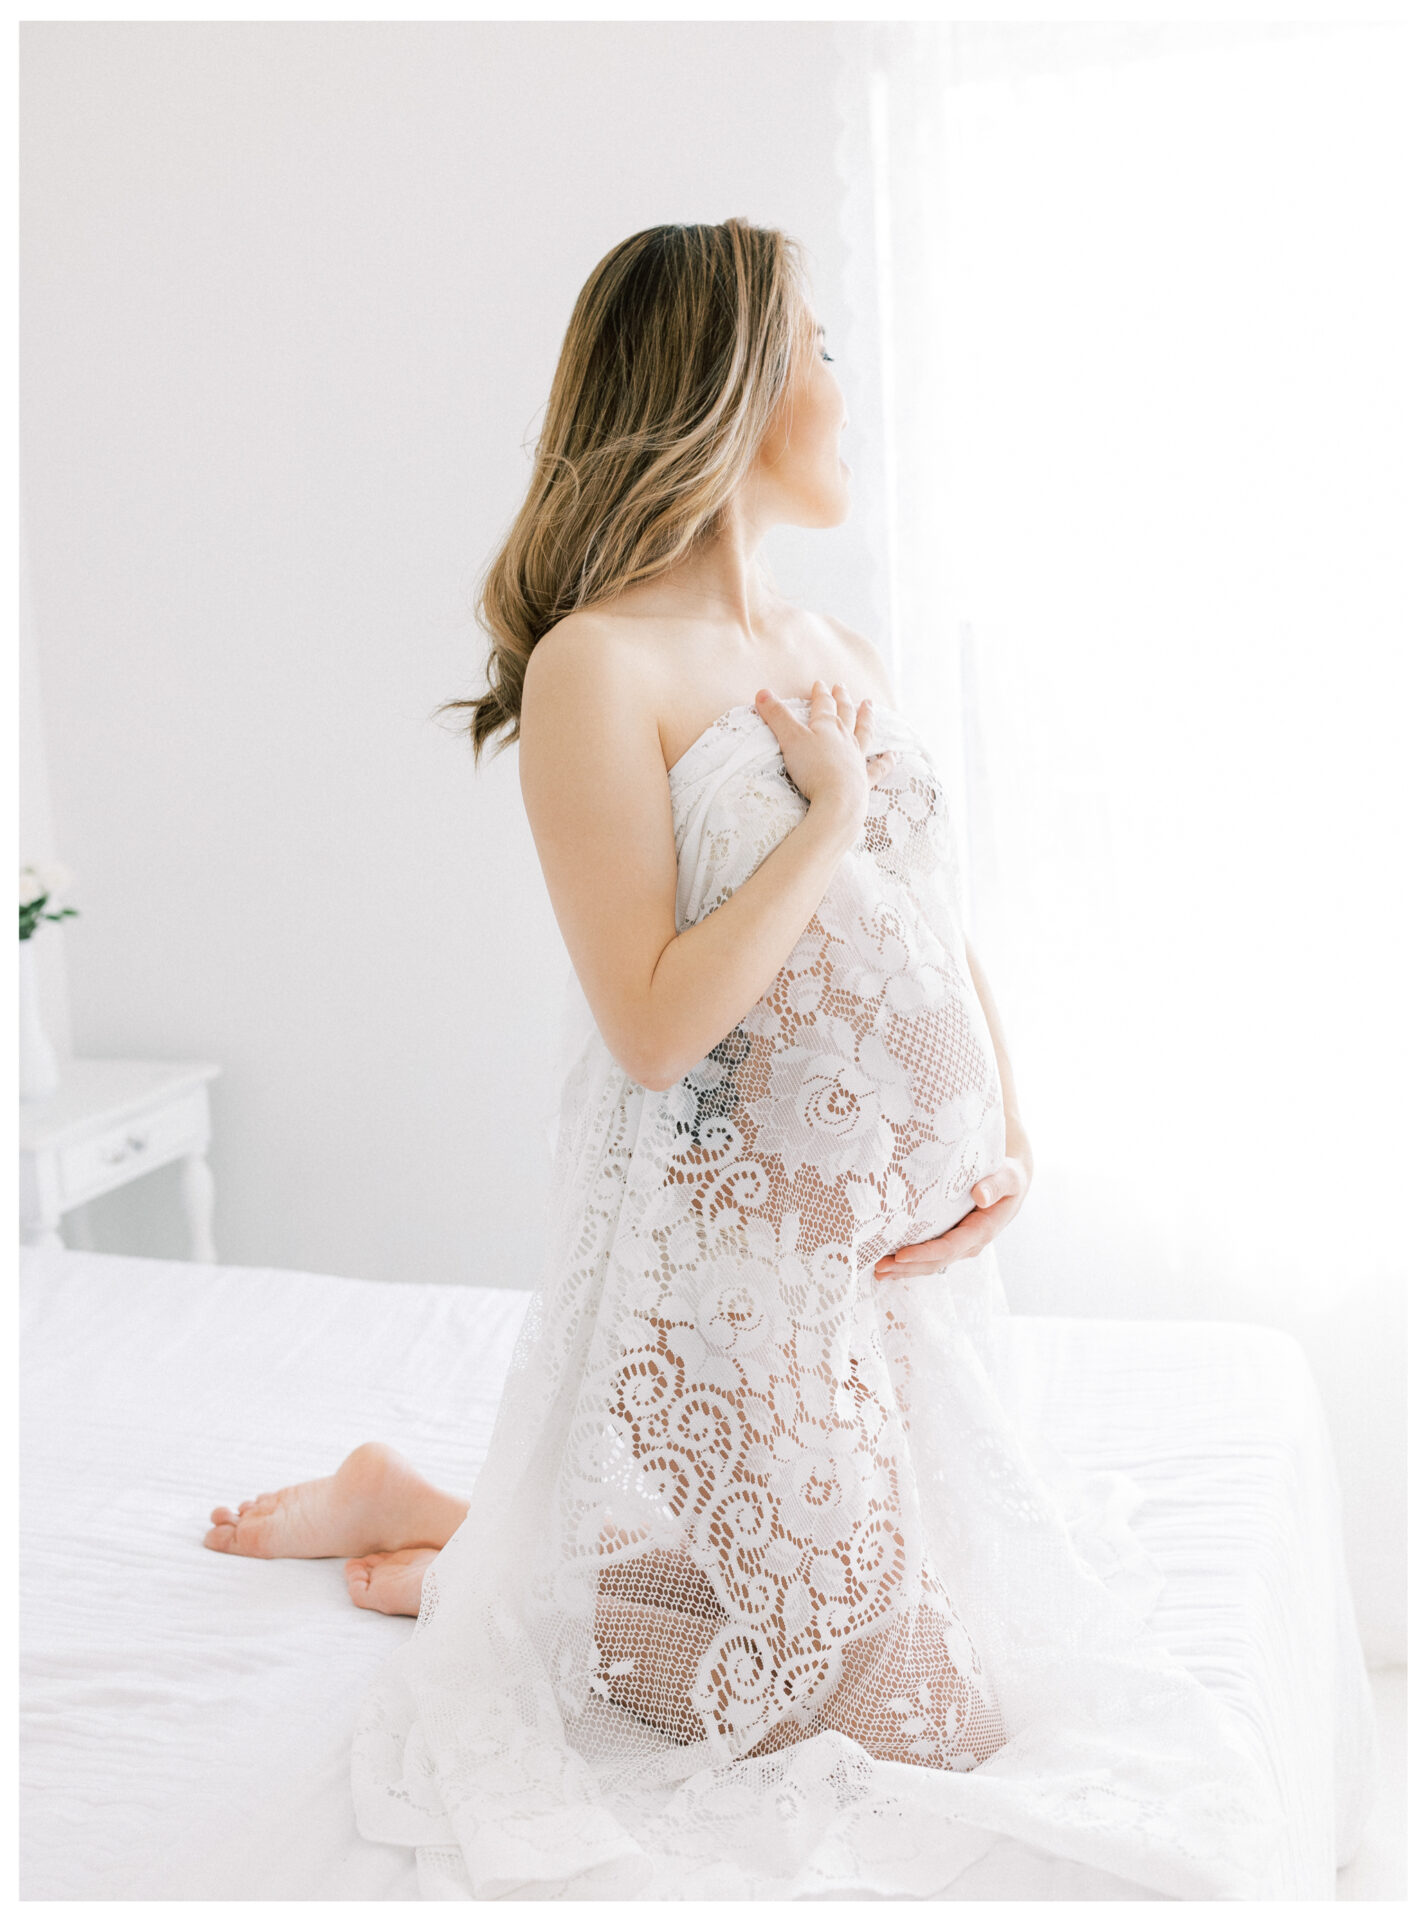 Winter Freire Photography | Fine Art Maternity Boudoir | Expecting mother holding vintage lace